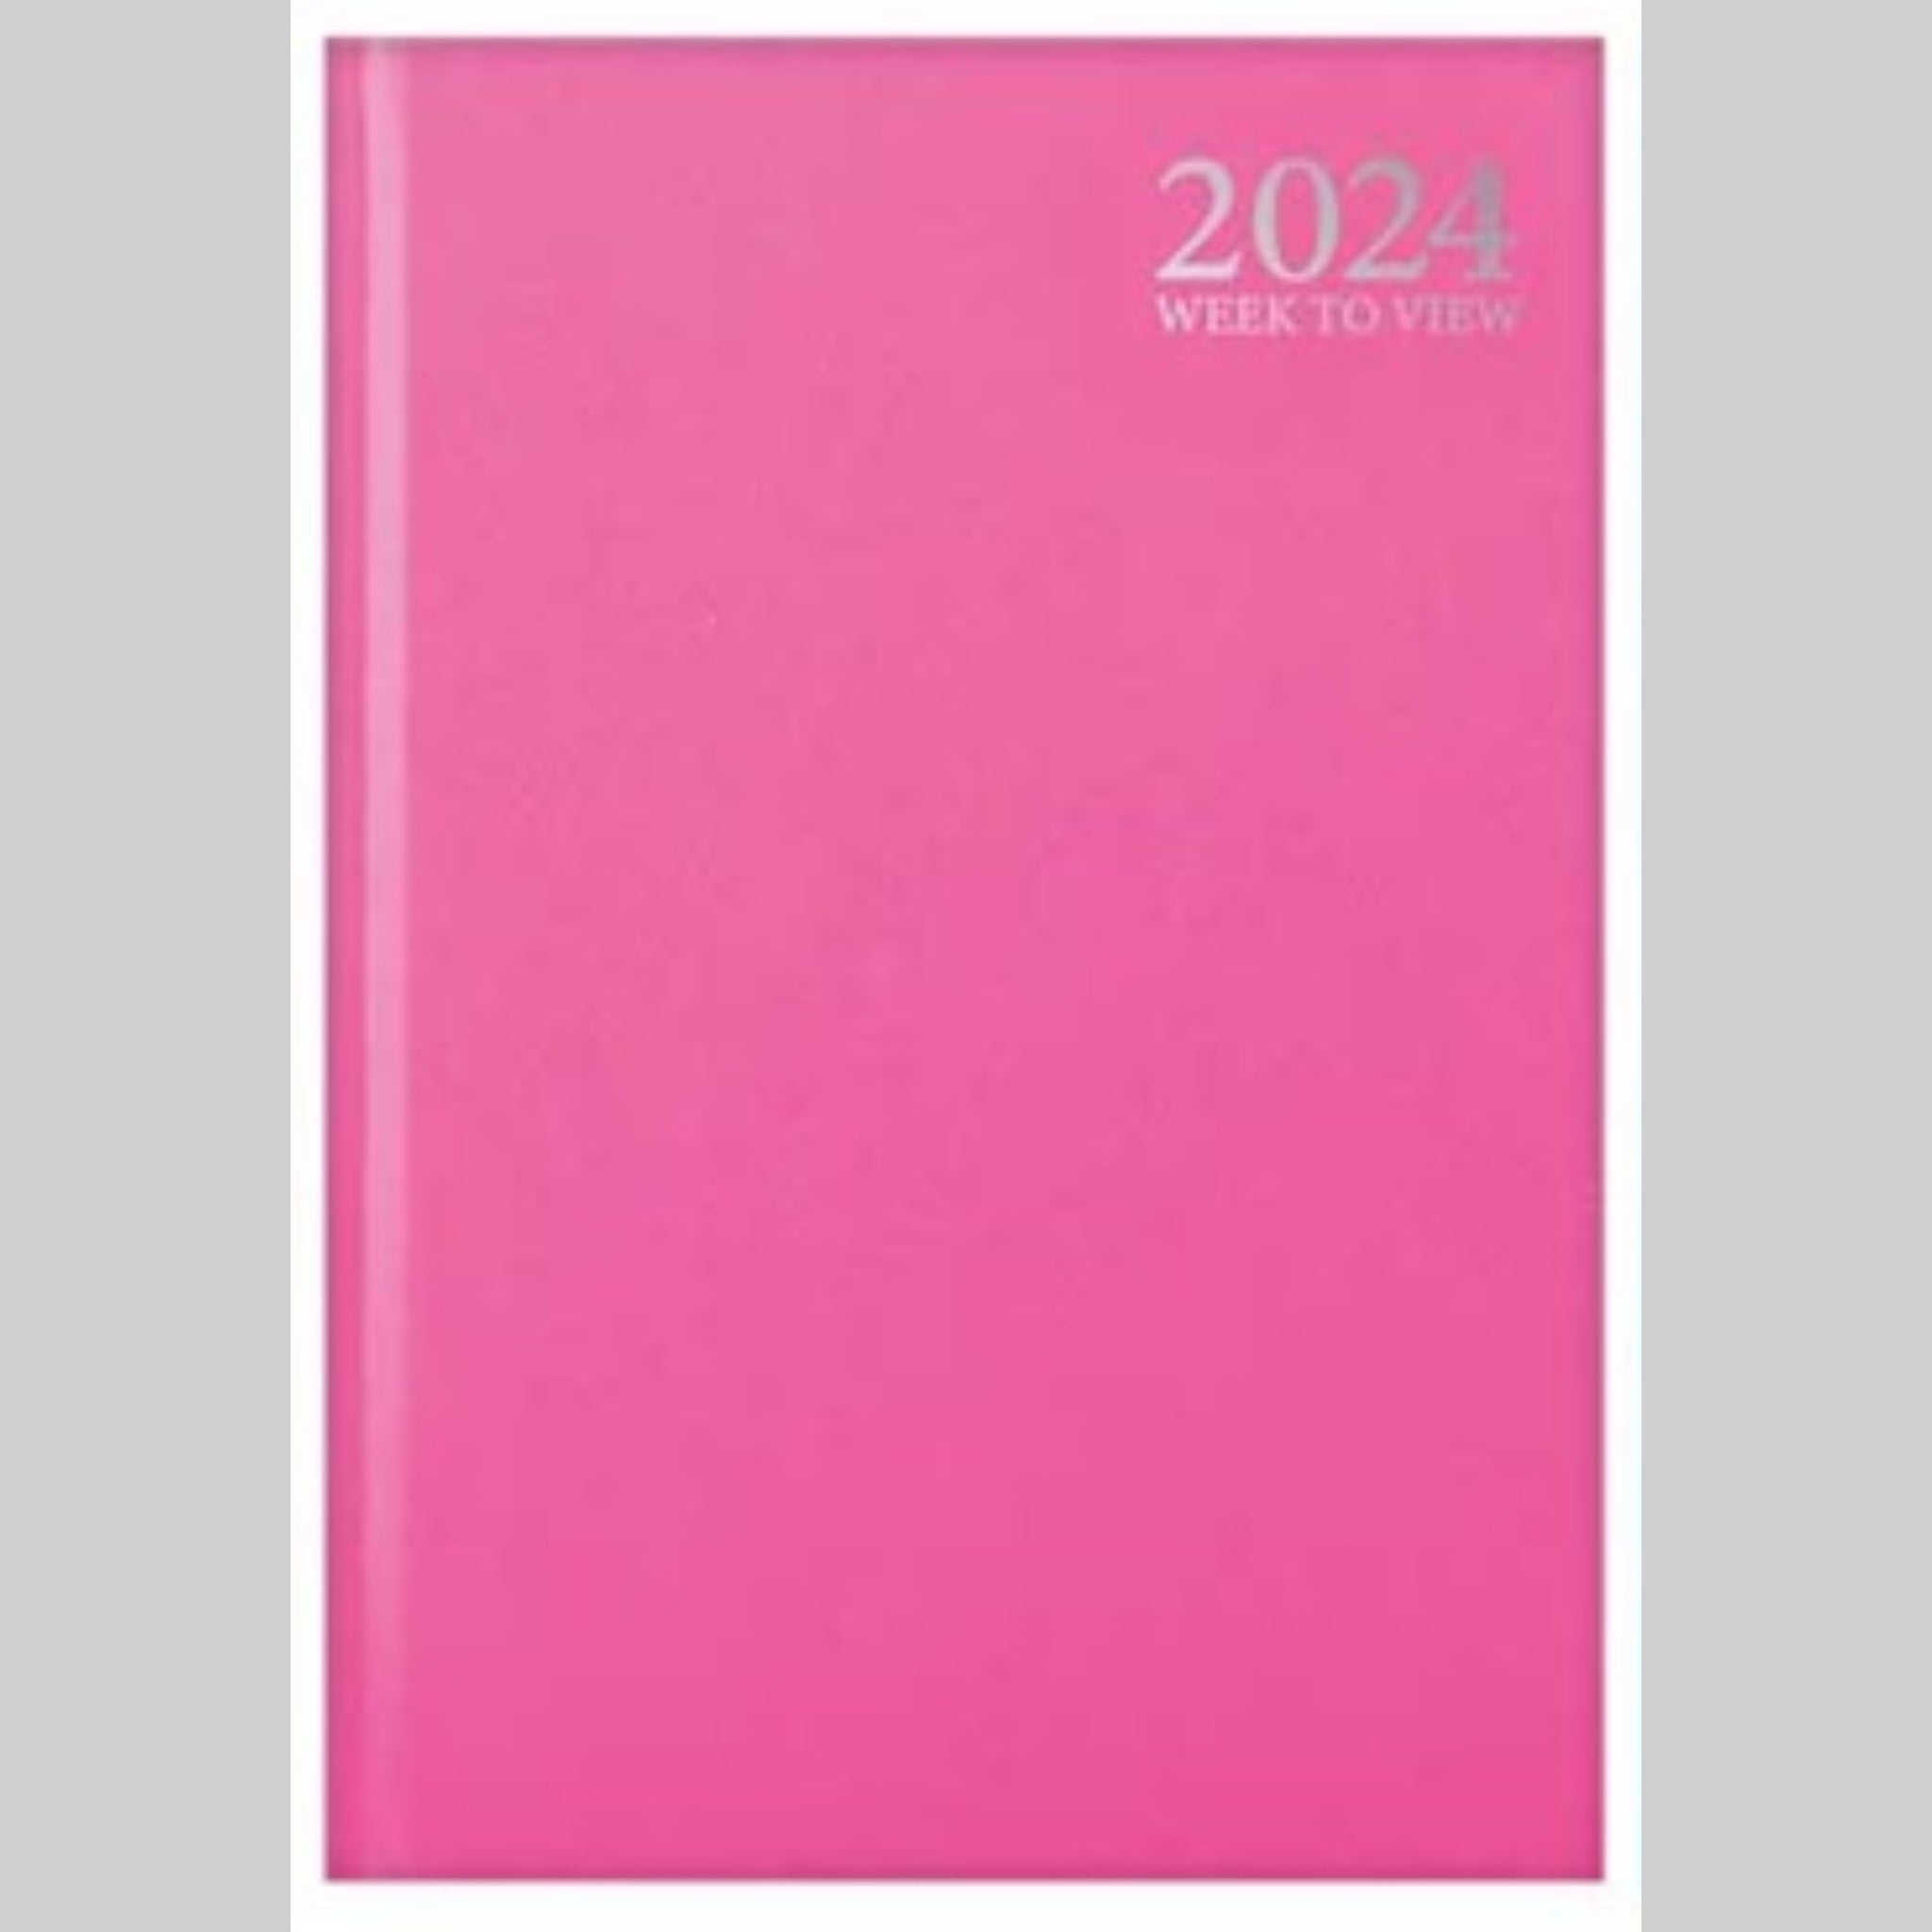 Beclen Harp 2024 A6 Size Week To View/WTV & Day A Page/ DAP Personal Luxury Effect Diary